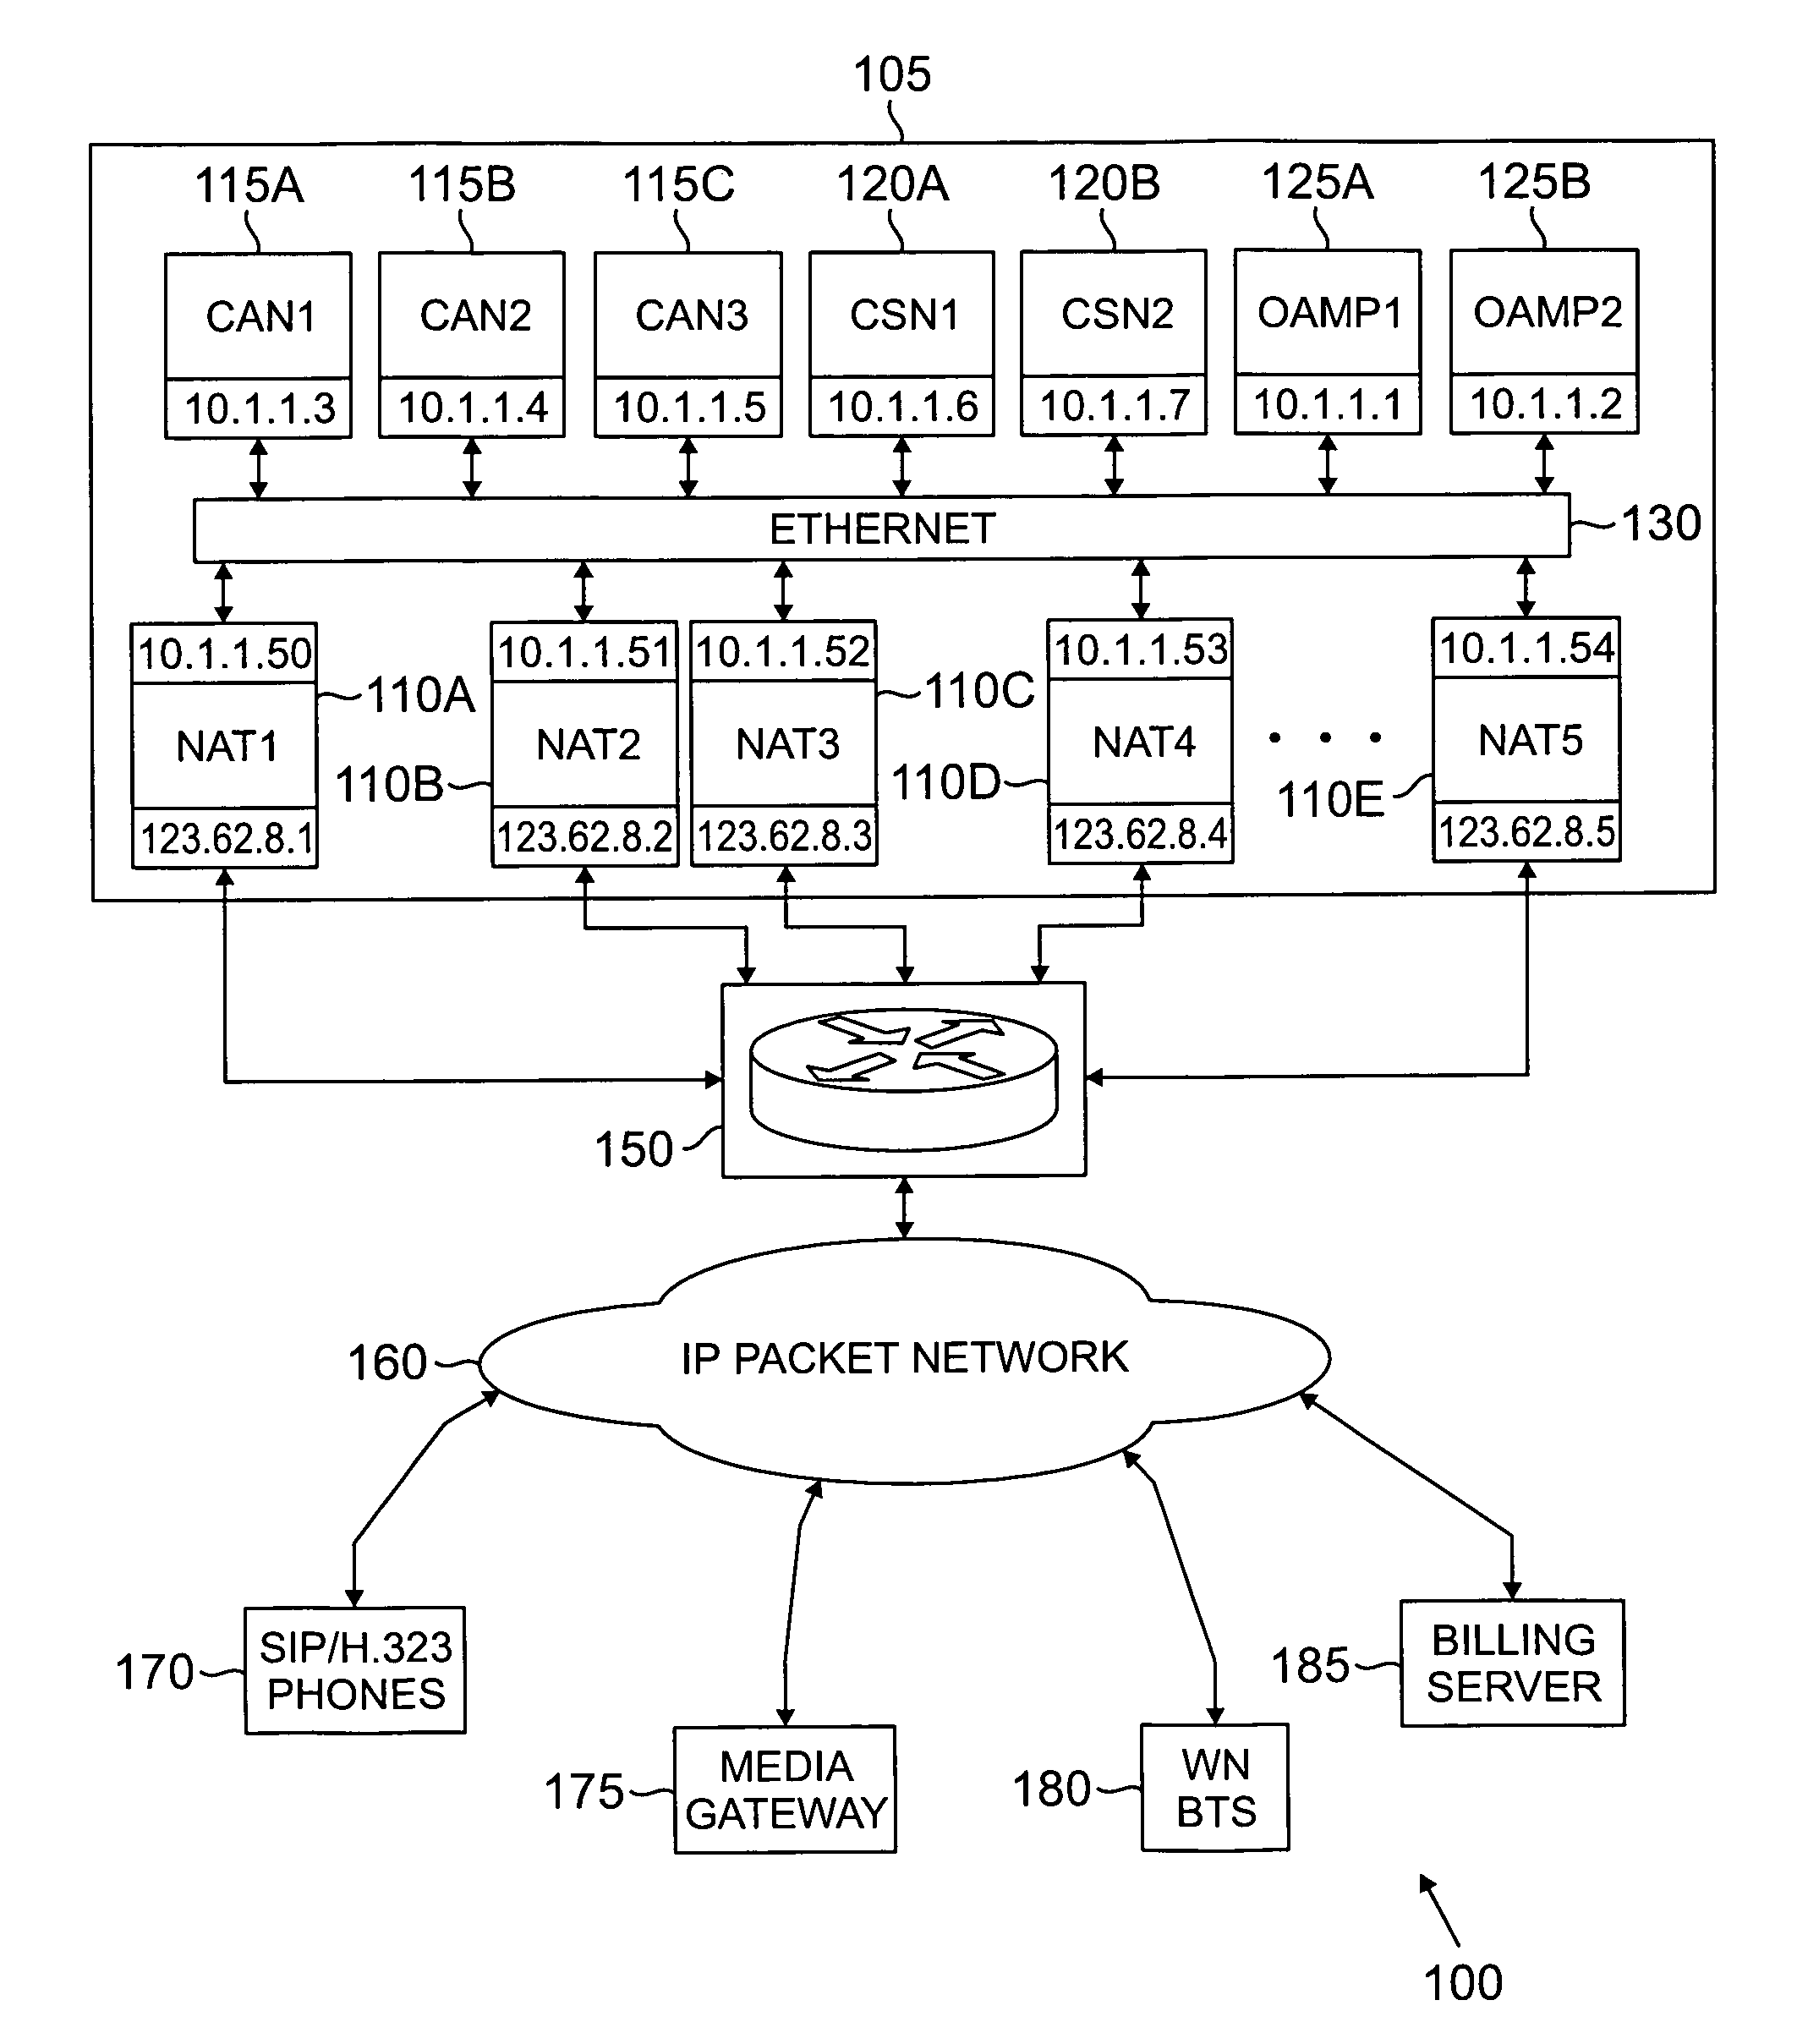 Soft switch using distributed firewalls for load sharing voice-over-IP traffic in an IP network